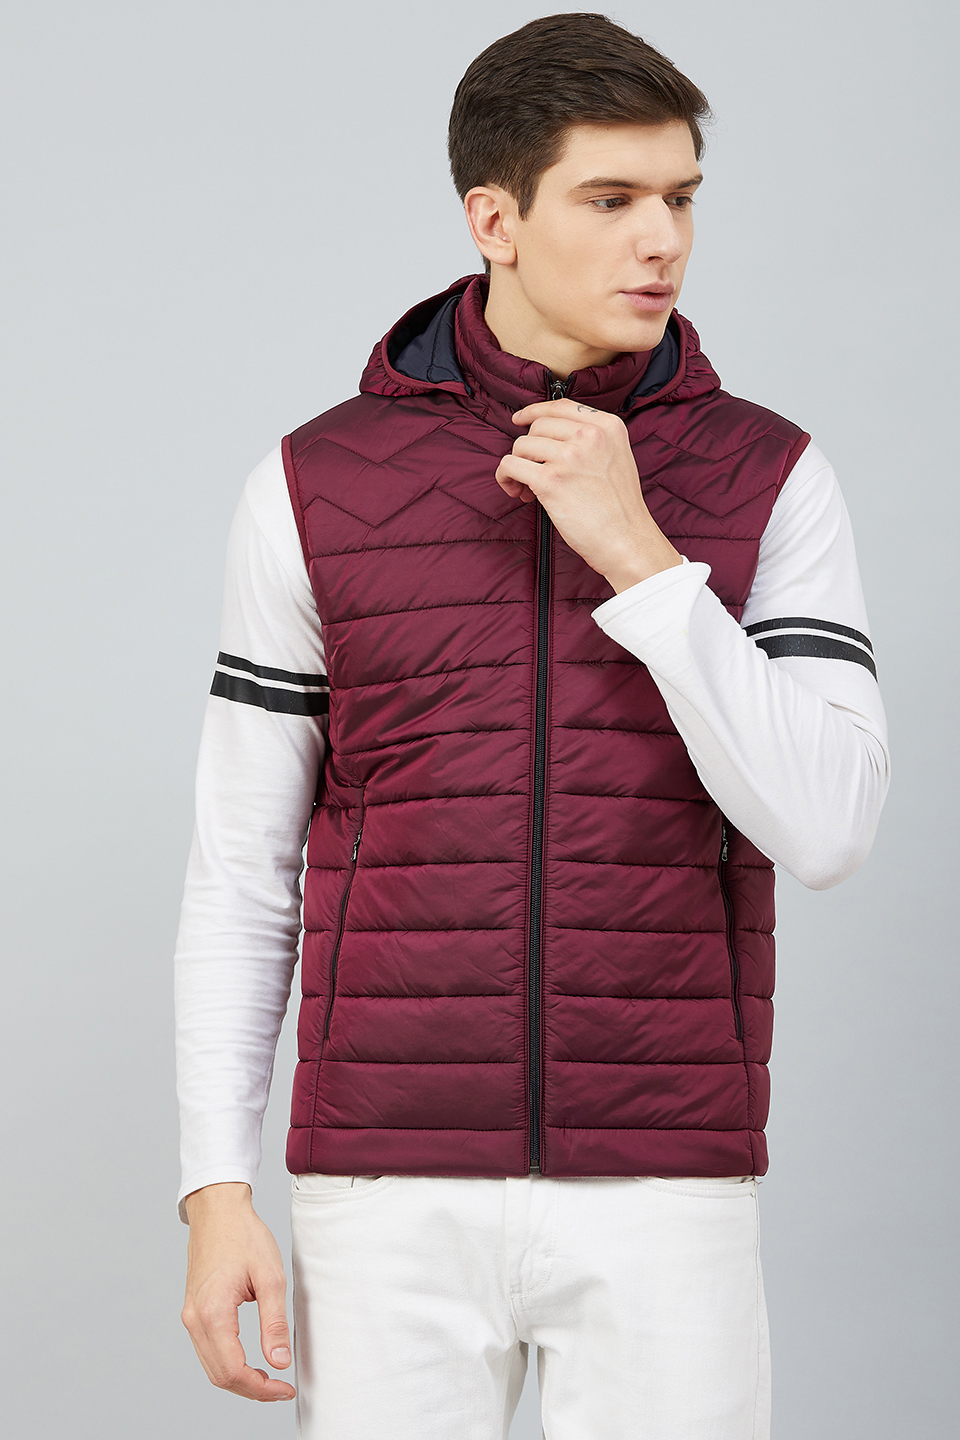 Hitachi High Quality Fashion Men Waistcoat Coats & Jackets Thick Stand  Collar Solid Color Cotton Vest Down Jacket Sleeveless Autumn Winter | Wish